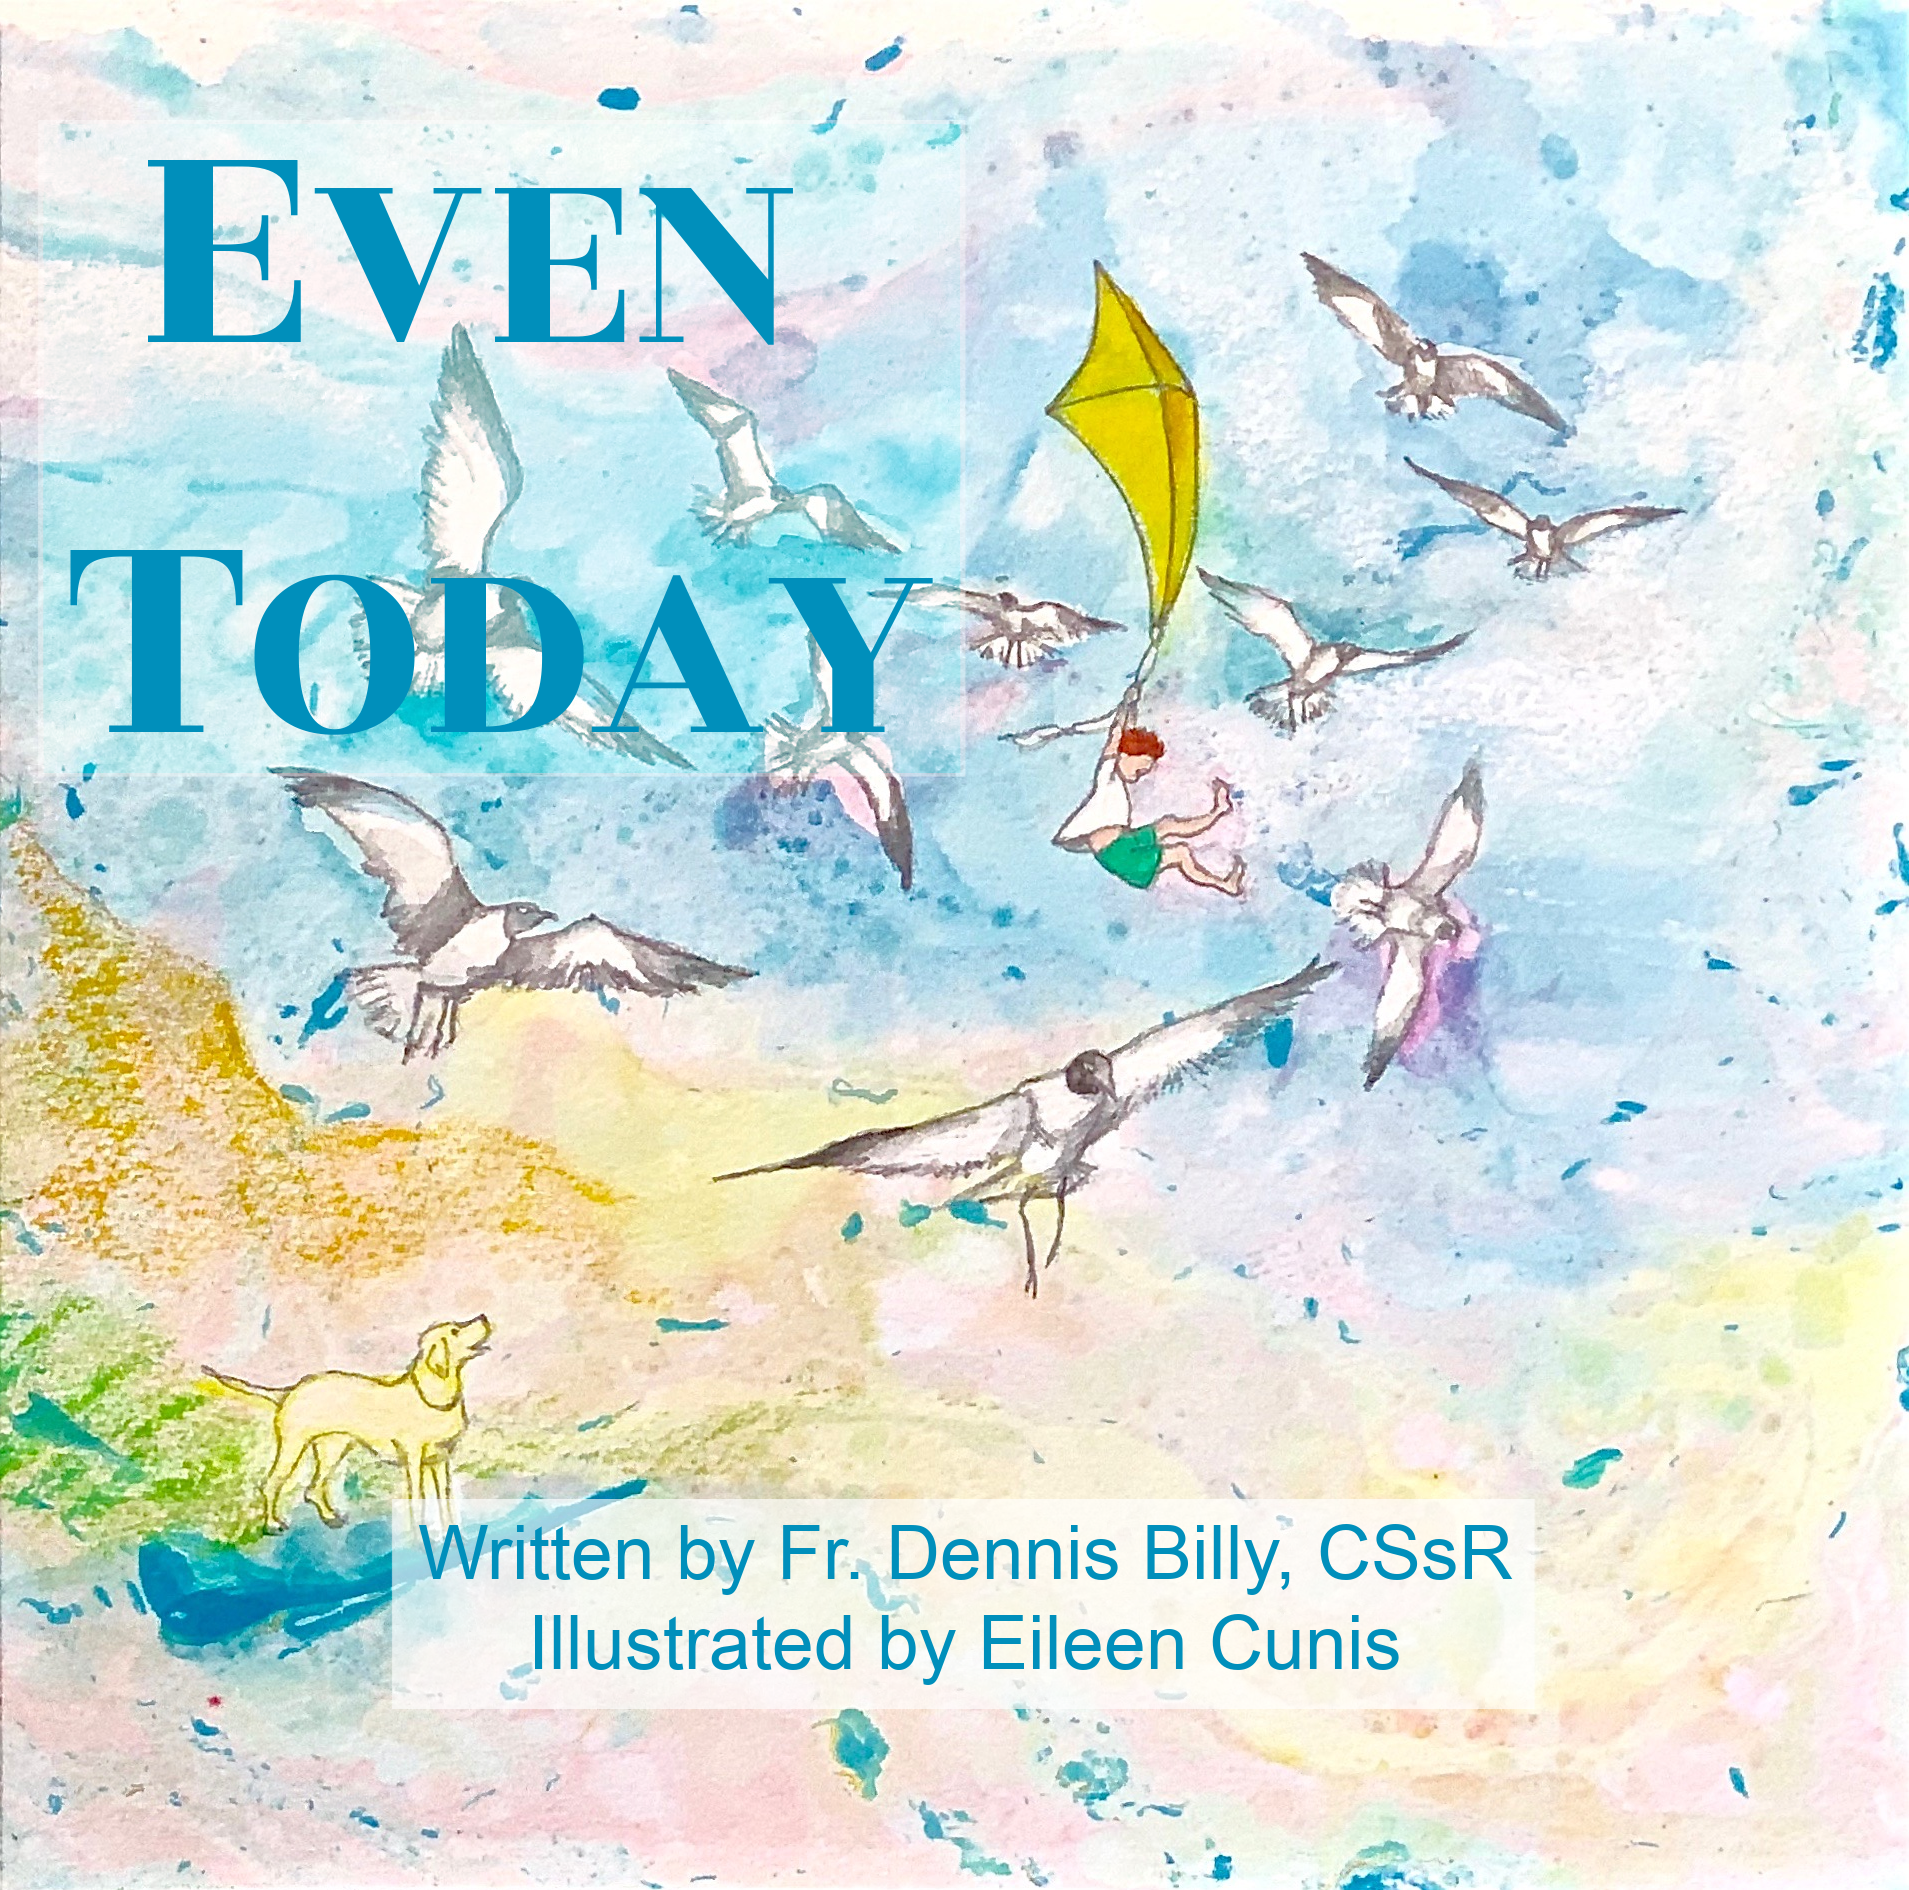 Even Today by Fr. Dennis Billy, CSsR, and illustrated by Eileen Cunis